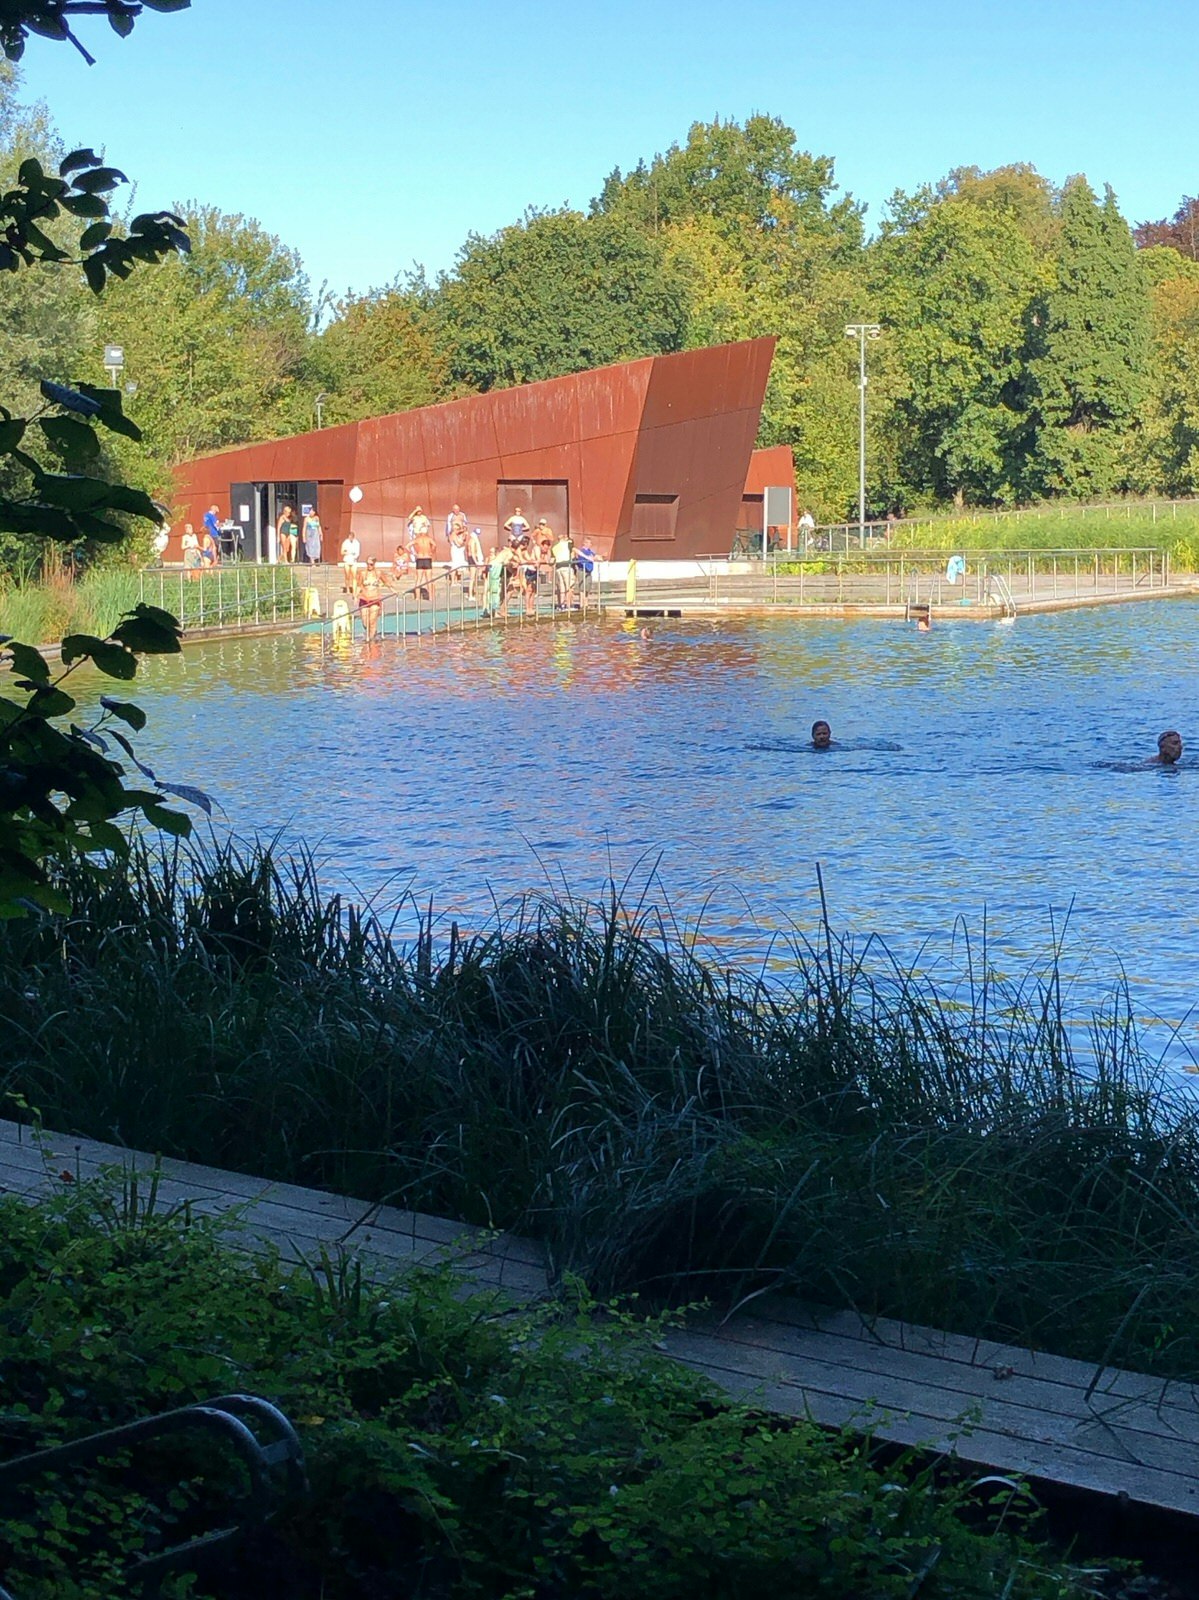 View of the natural swimming pond, Boekenger, in Antwerp on a clear sunny day. There is a small group of people swimming and lounging on the steps near the pond 